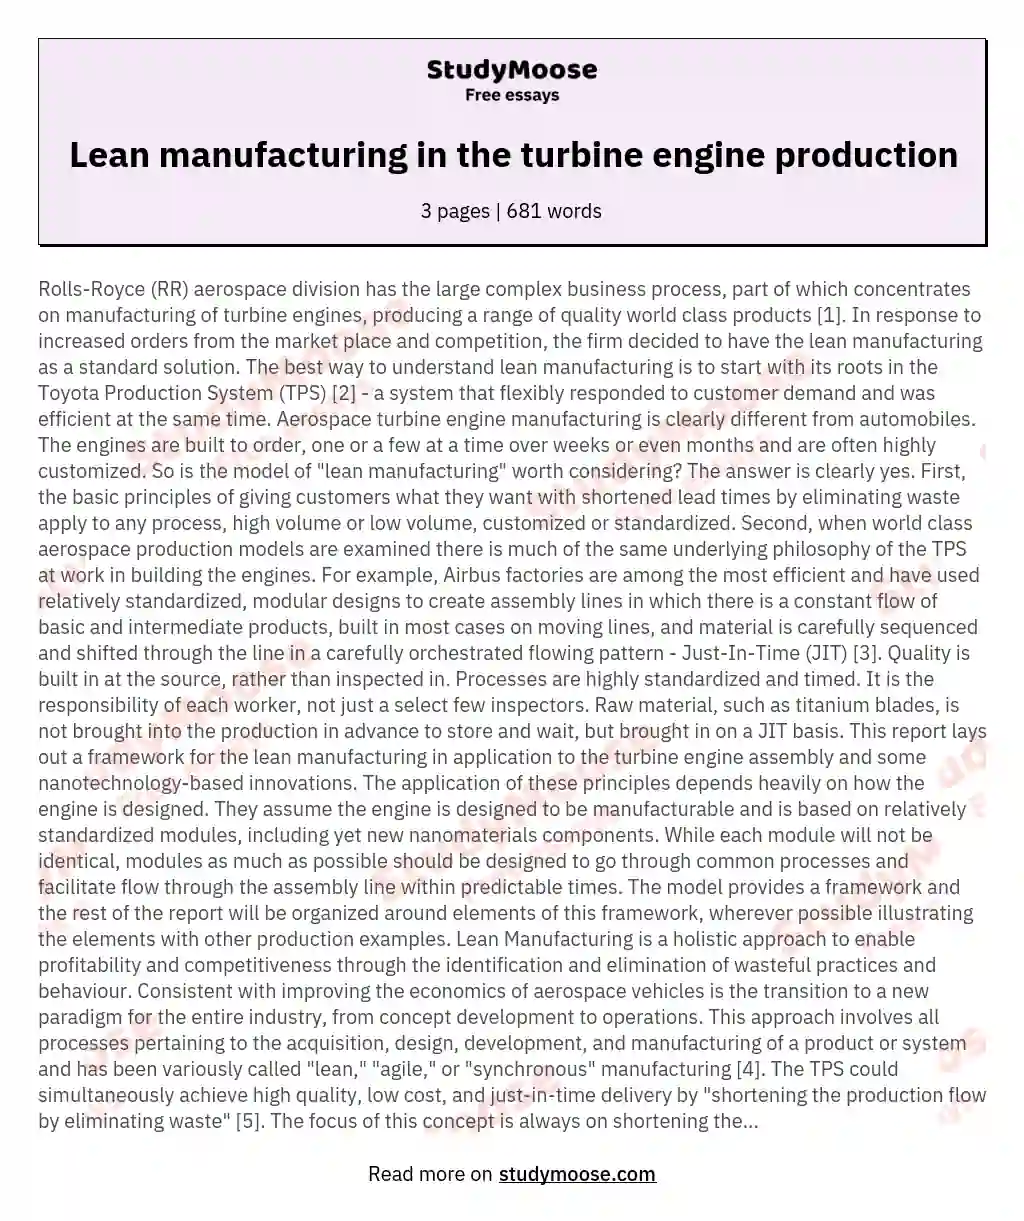 Lean manufacturing in the turbine engine production essay